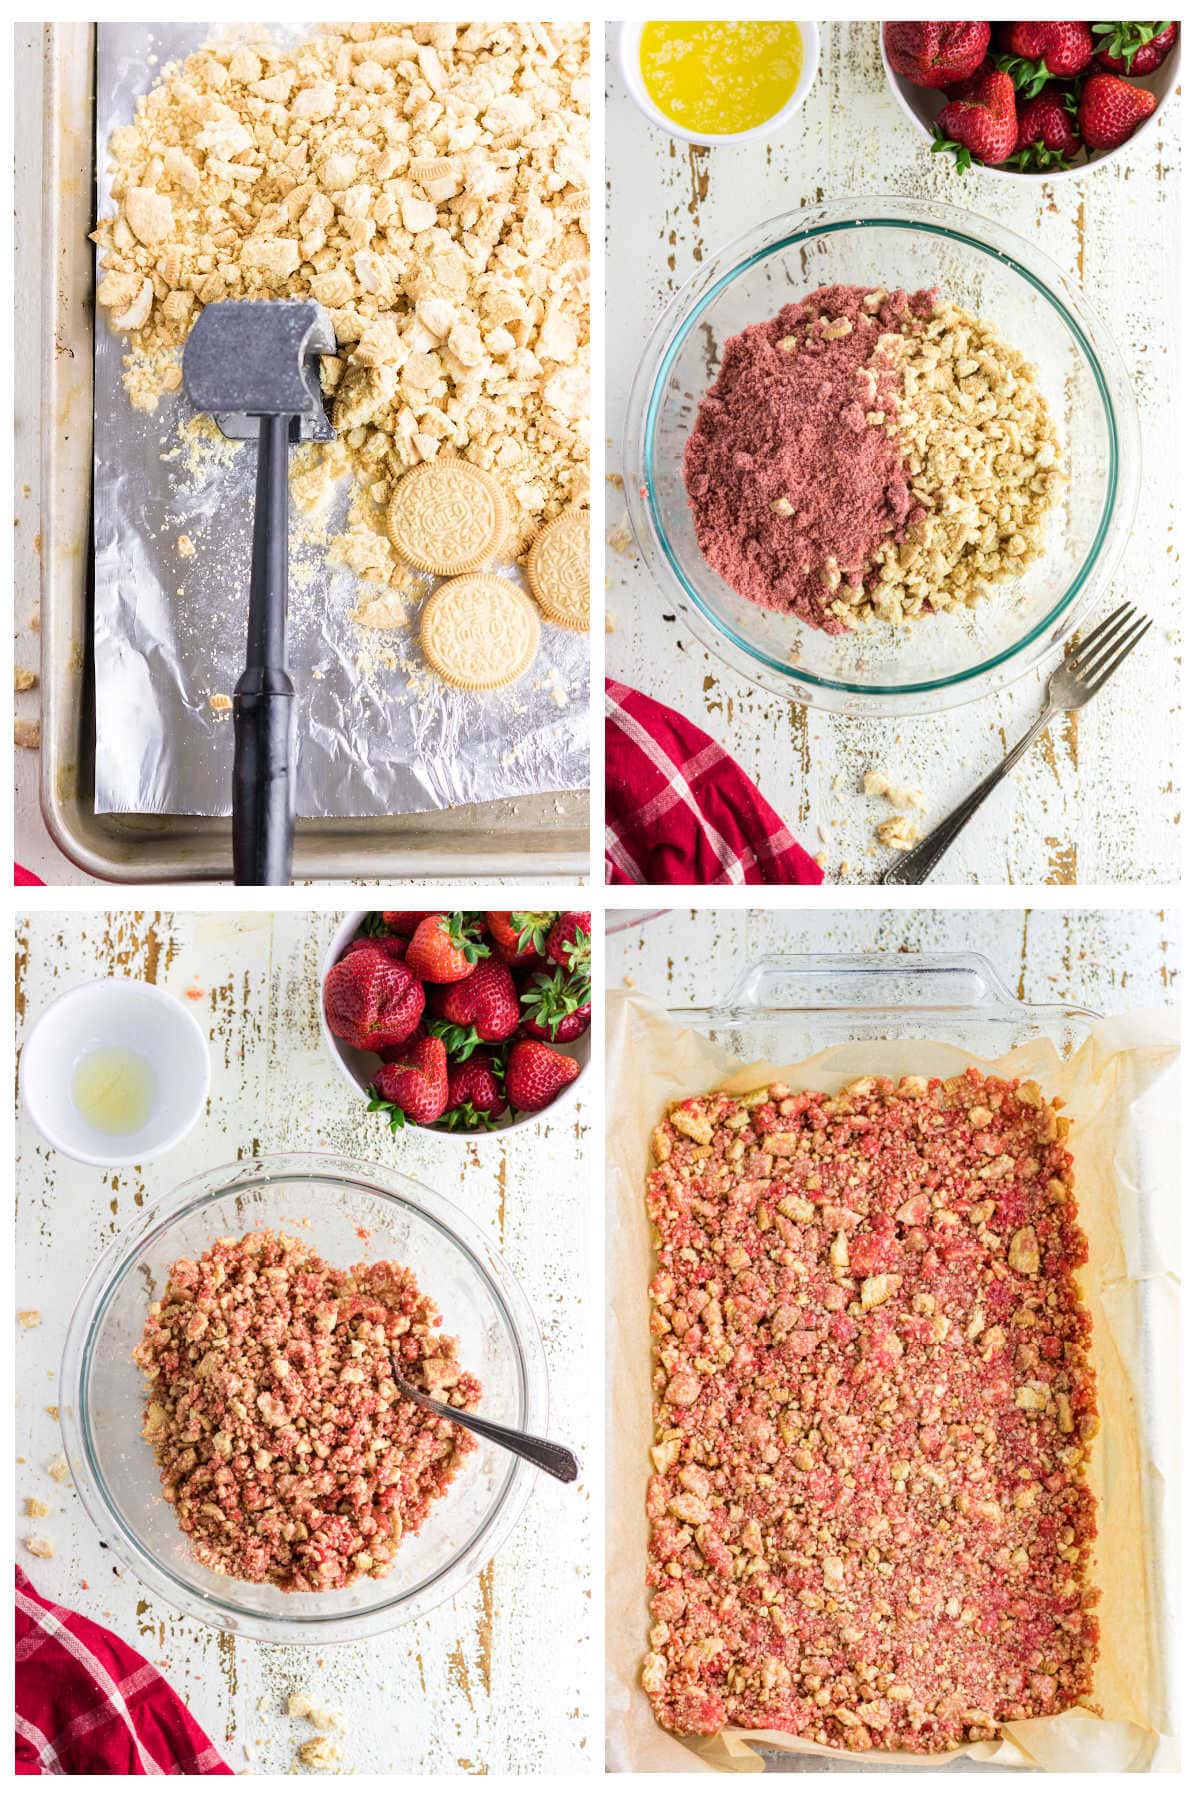 Collage of images showing how to make the crumbs for strawberry crunch ice cream cake.